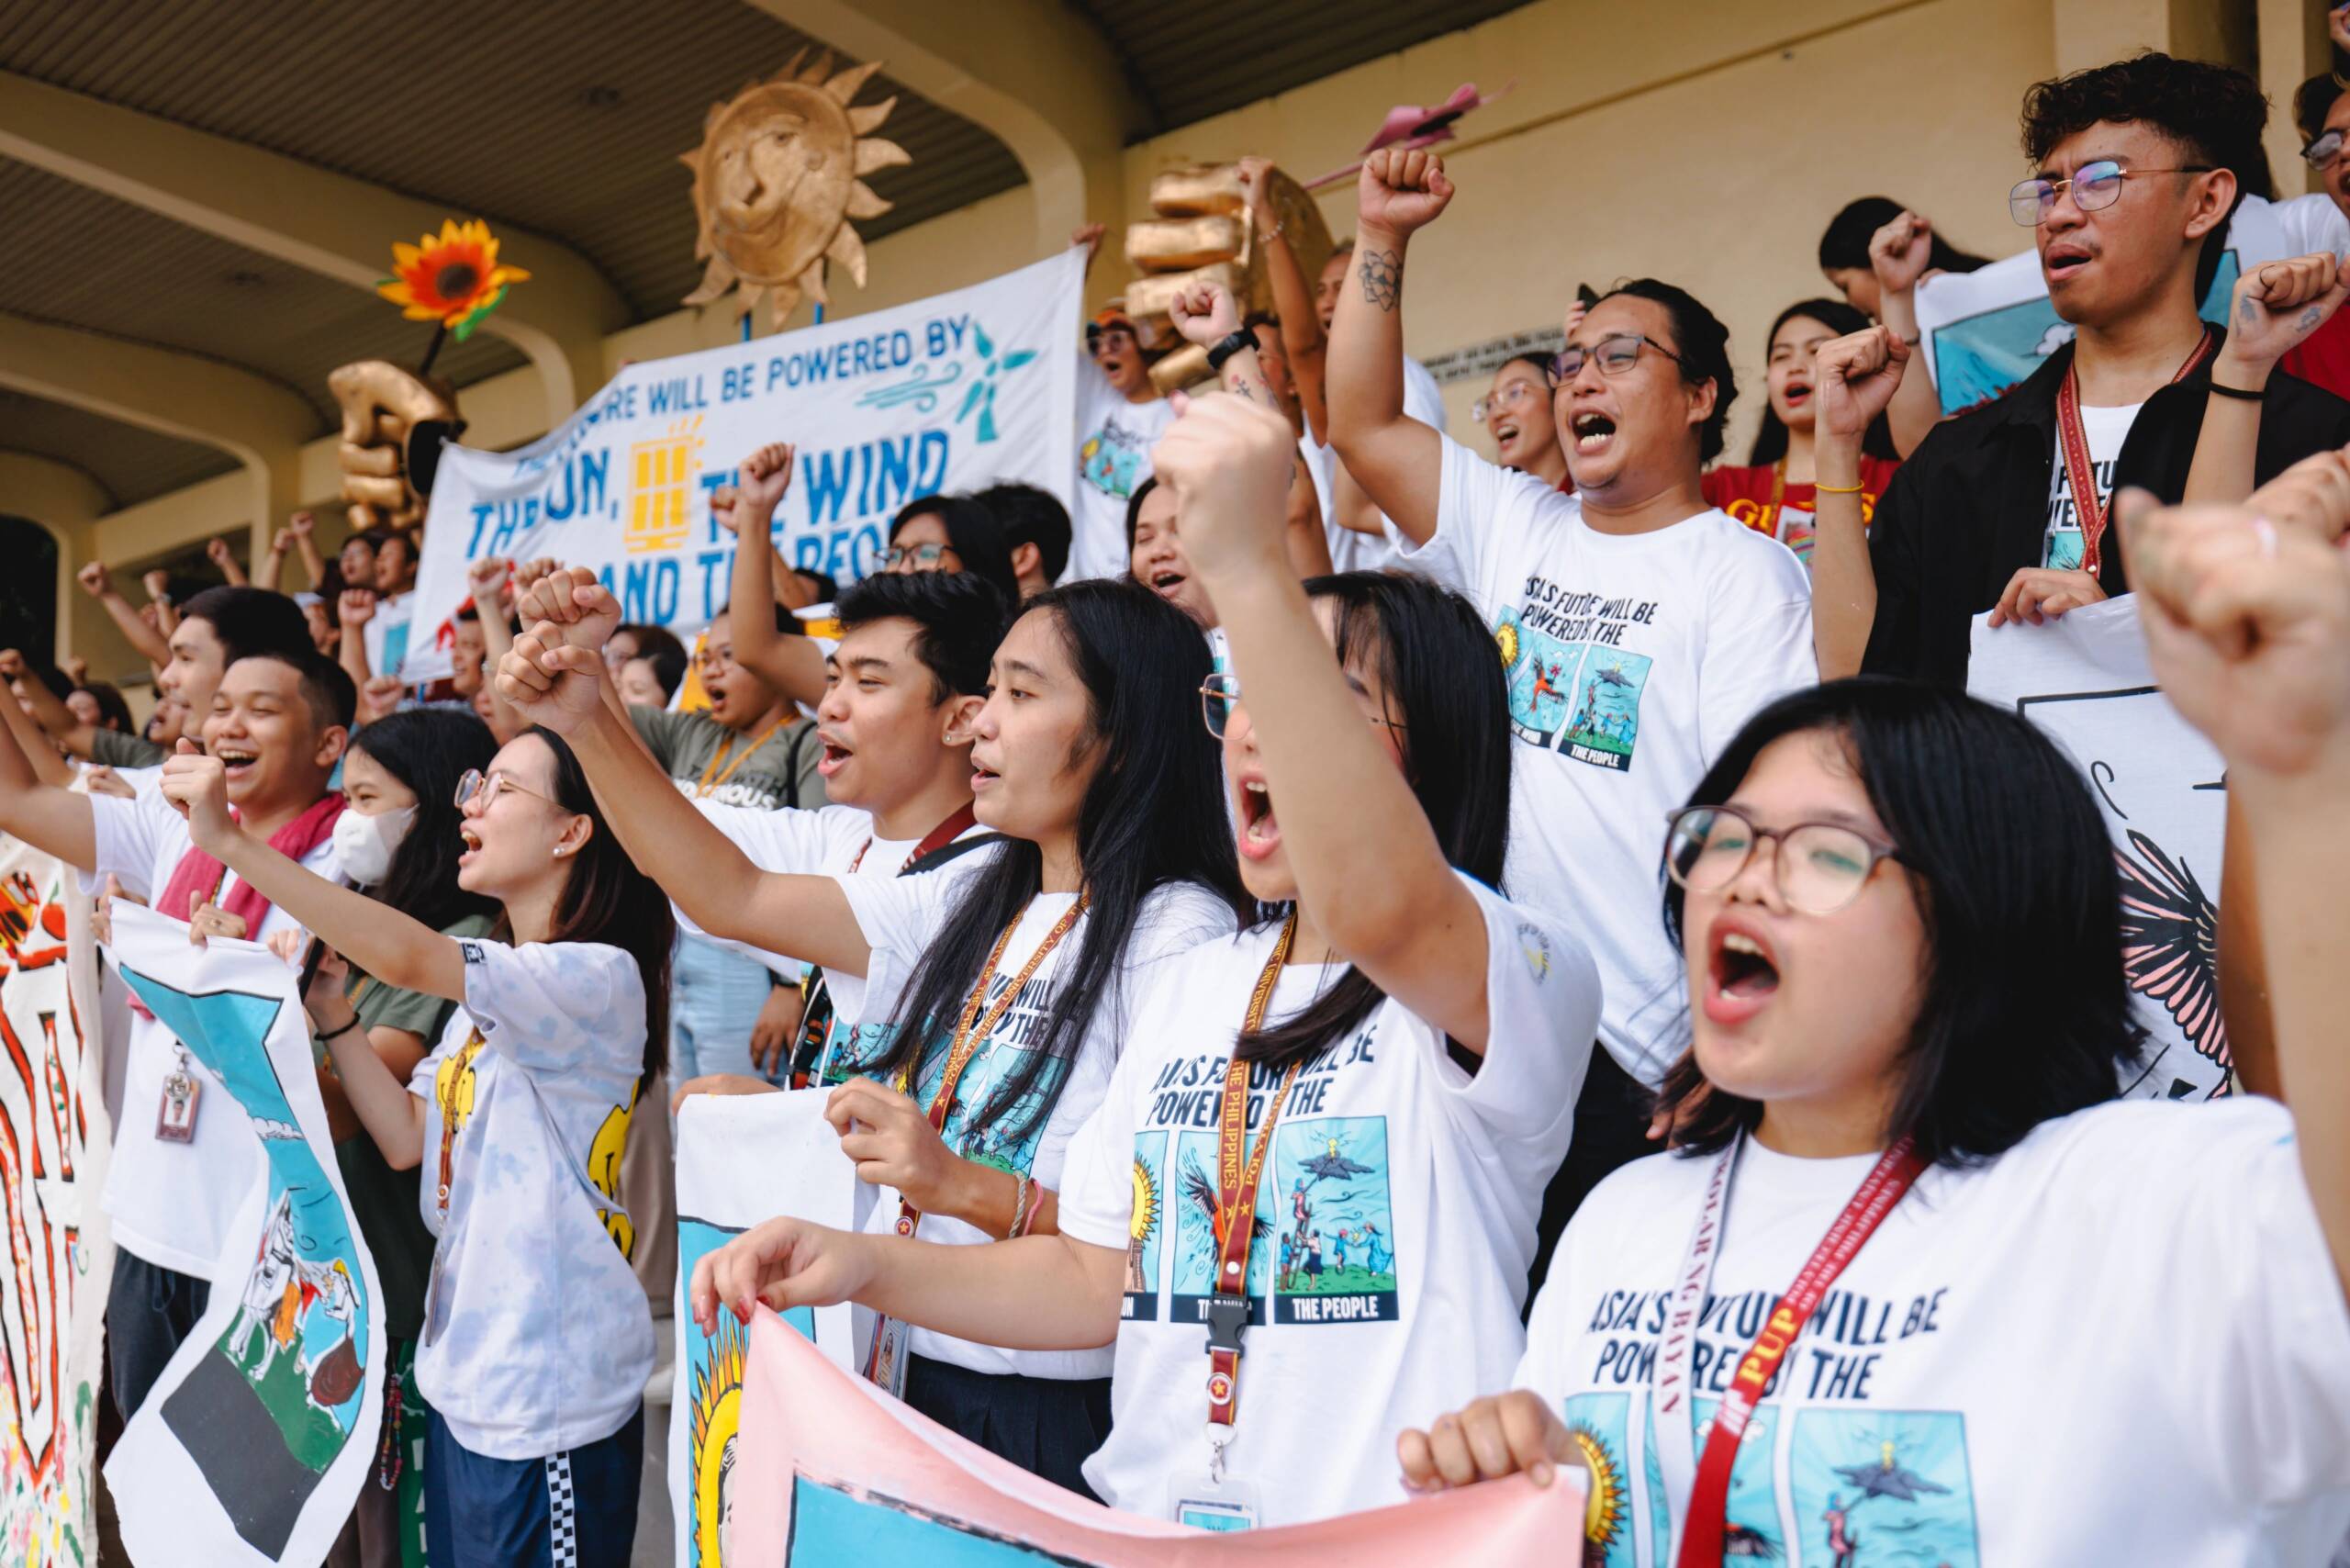 Manila, Philippines, November 8: Climate advocates and the Polytechnic University of the Philippines (PUP) Community call for a future powered up by the sun, the wind, and the people. The action also marks ten years since the devastating landfall of Typhoon Haiyan (Yolanda), one of the most powerful tropical cyclones ever recorded. Photo credit: Jilson Tiu